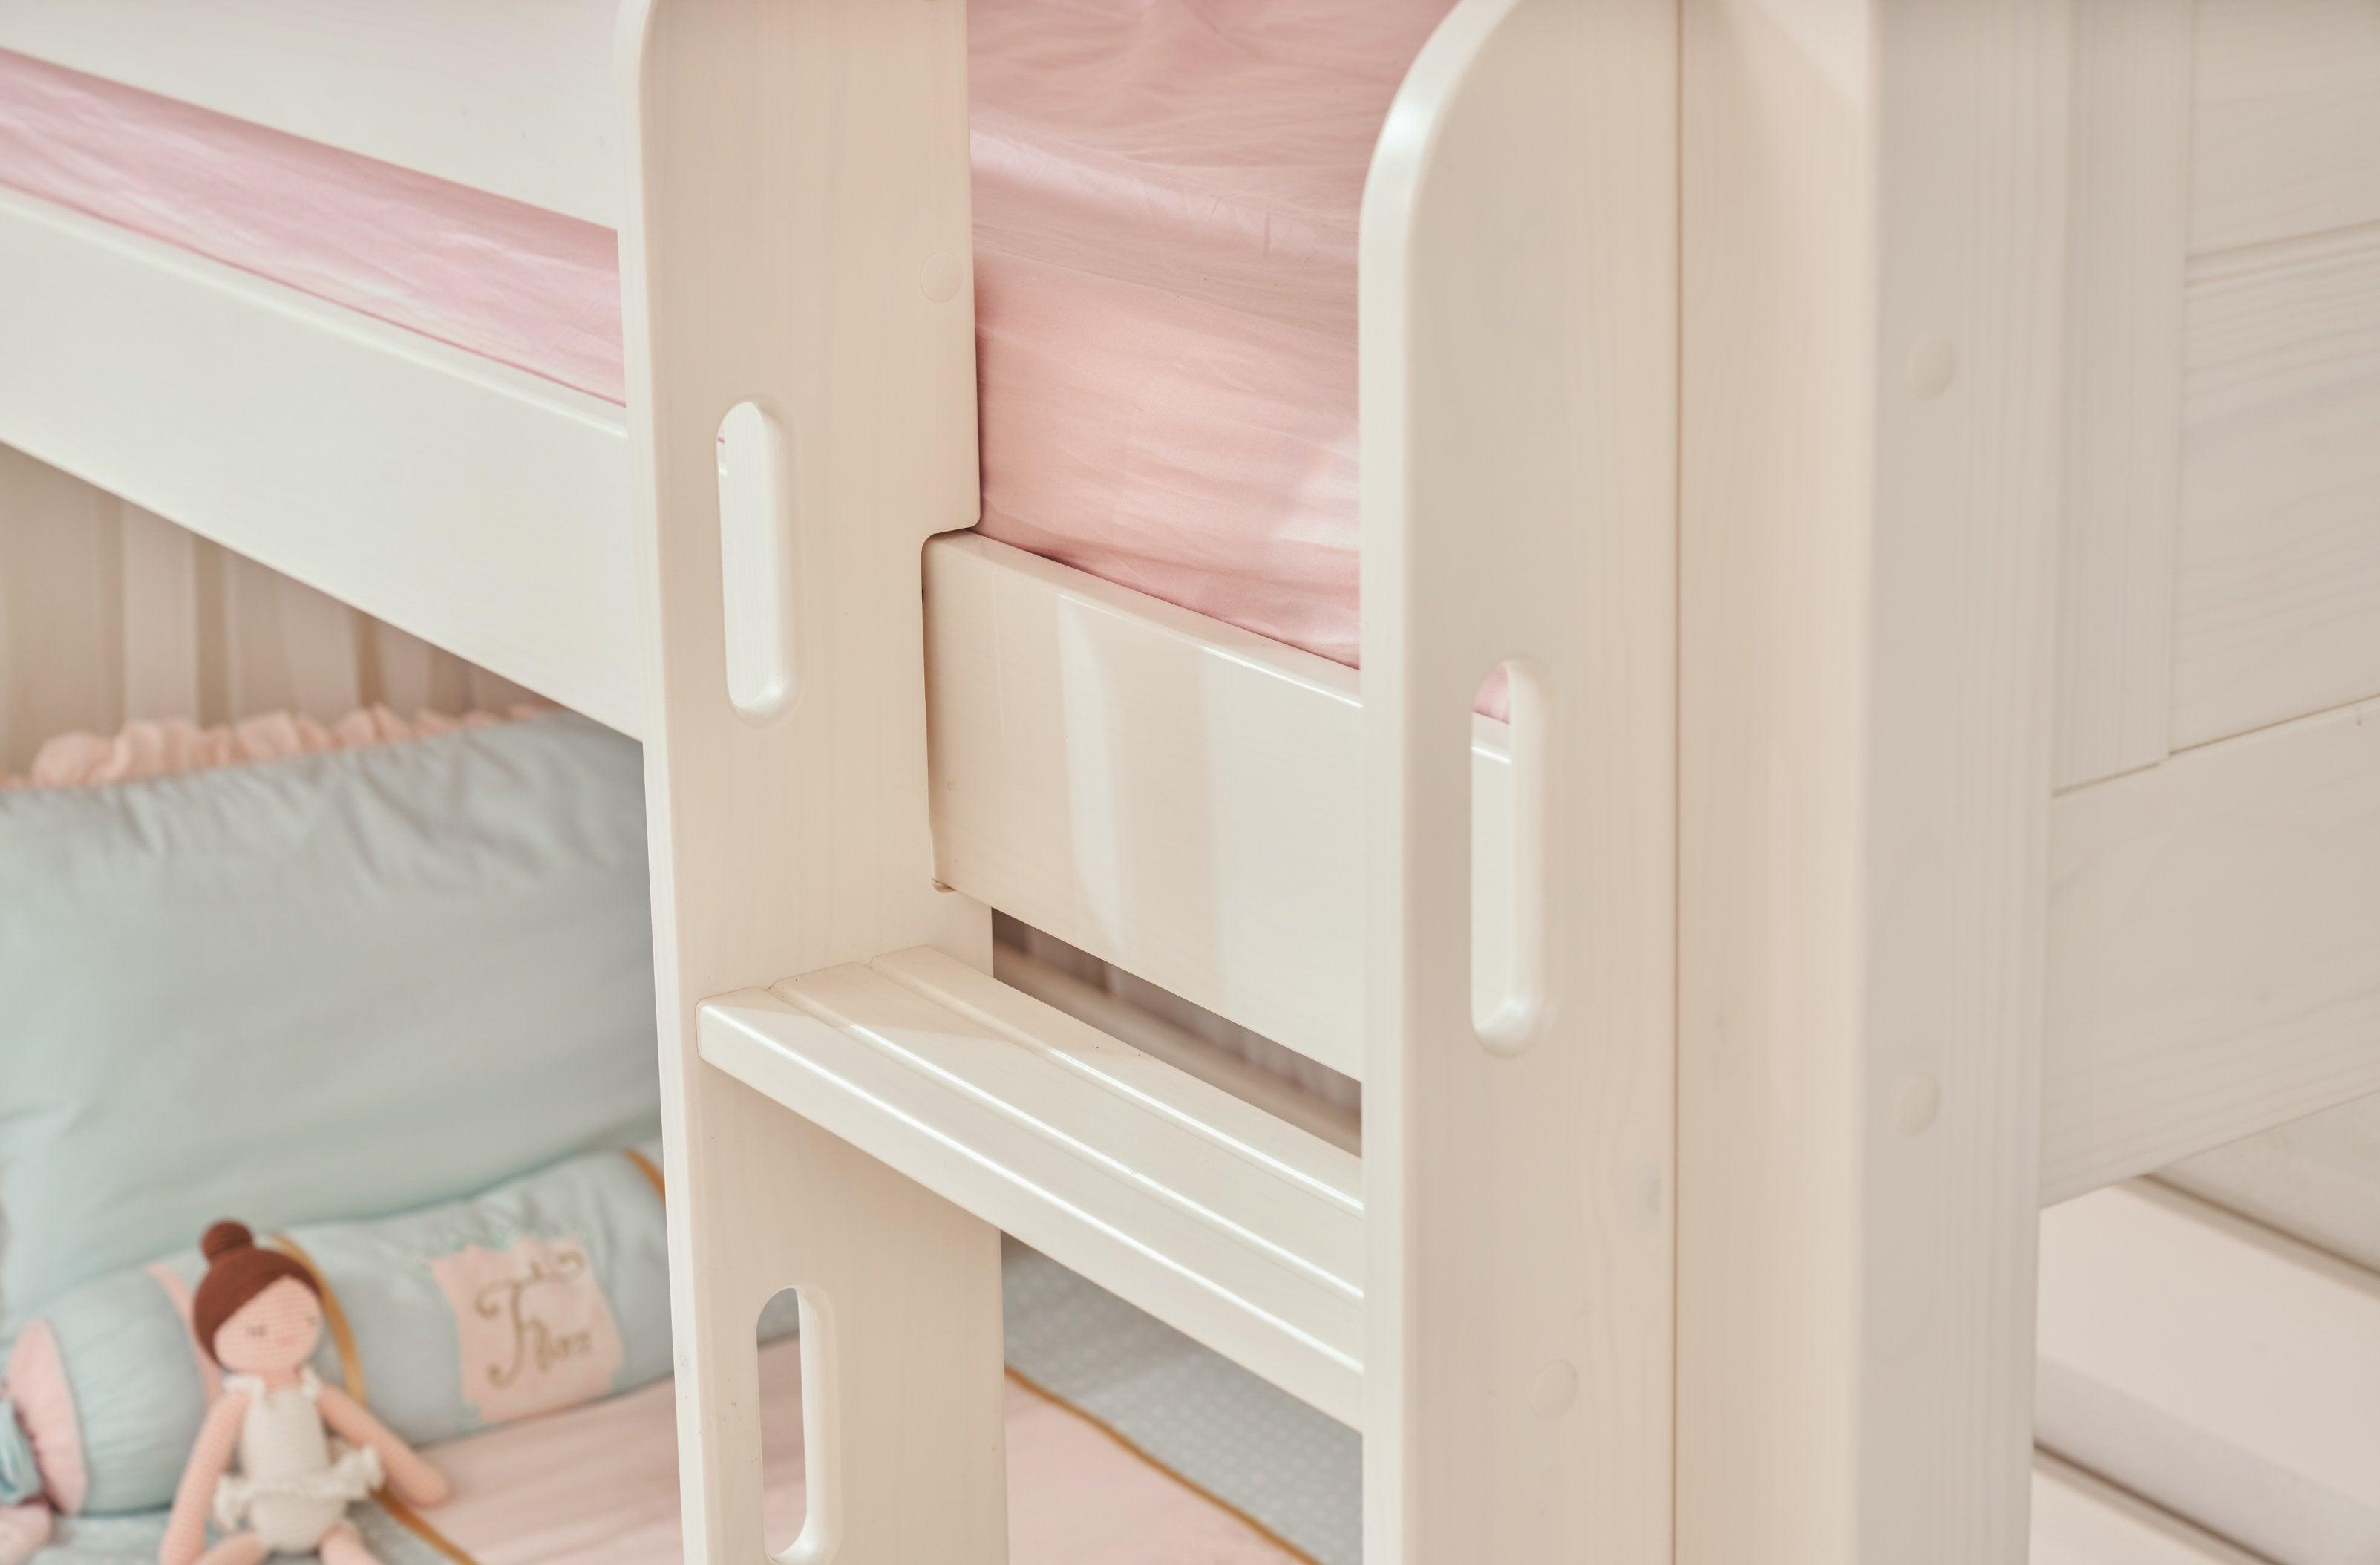 ModBed Floor Bunk Bed (with roof options - Single or SS) - Kids Haven